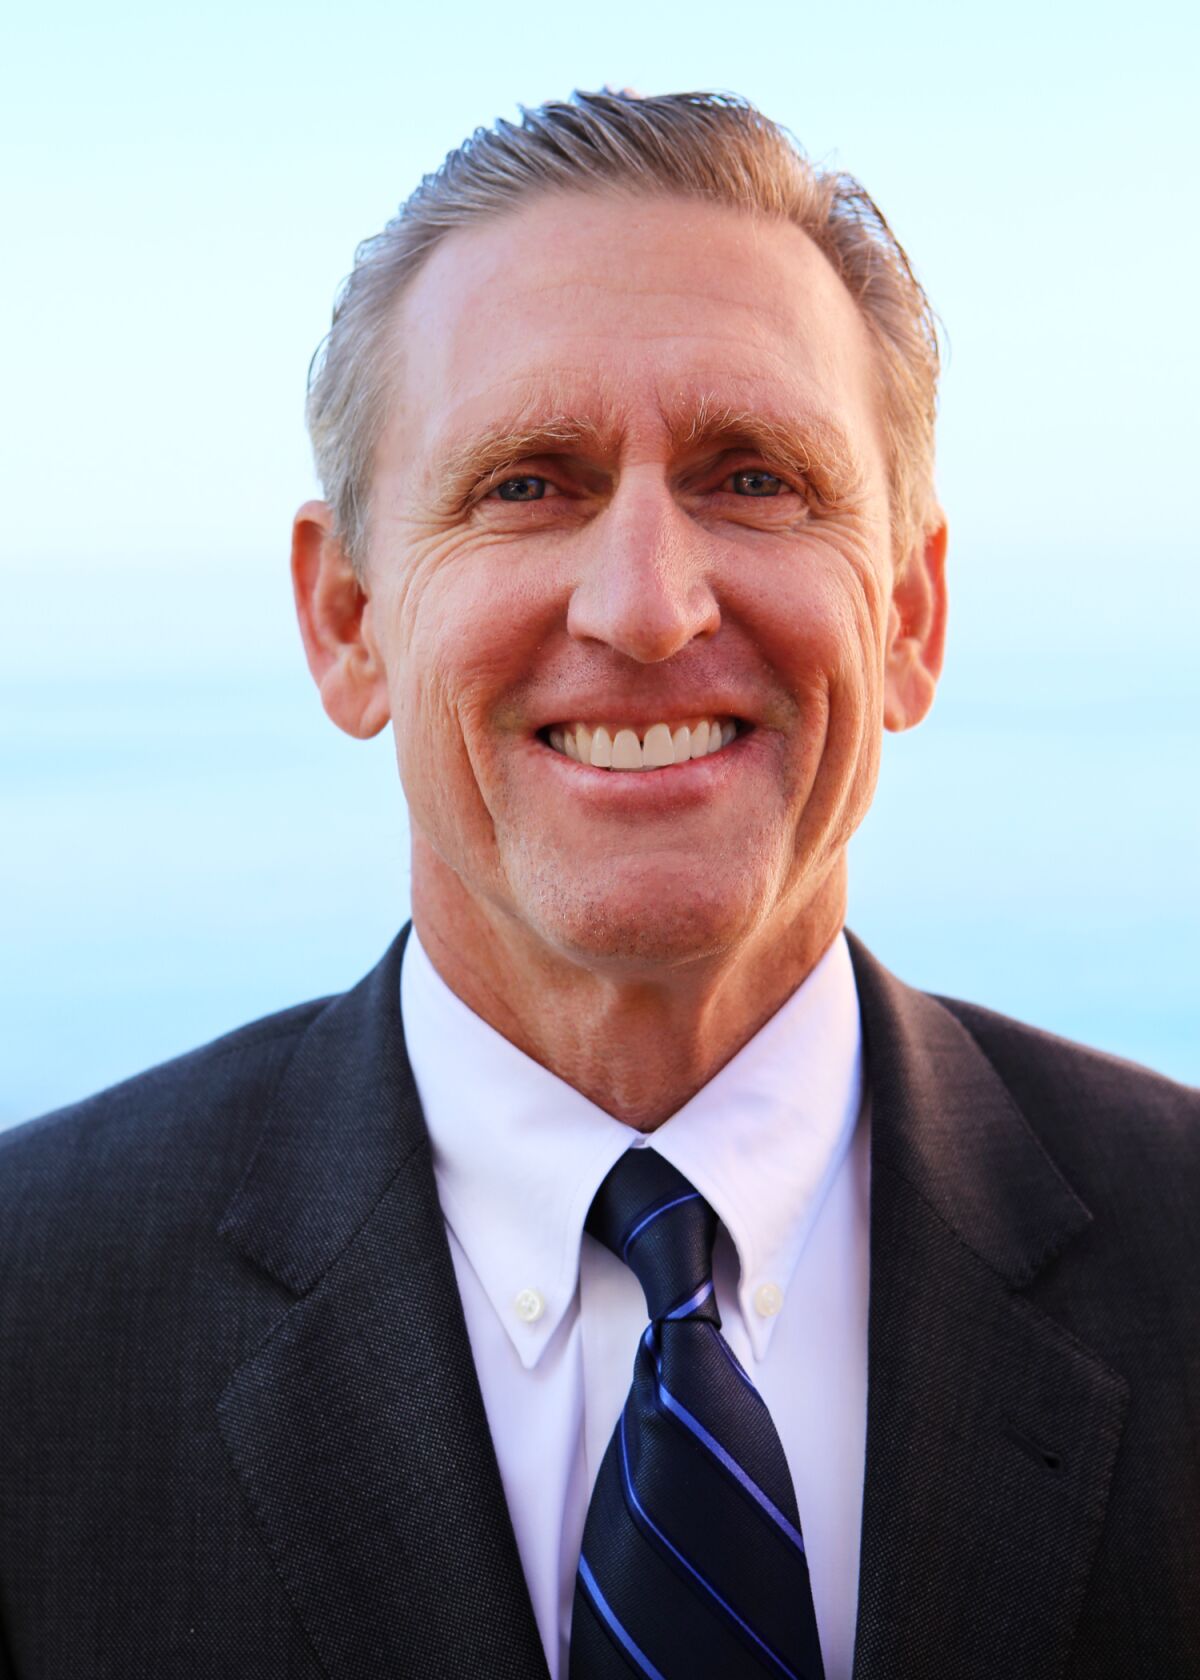 Arthur Johnson is the founder and co-owner of Mundoval Capital Management Inc. in La Jolla.